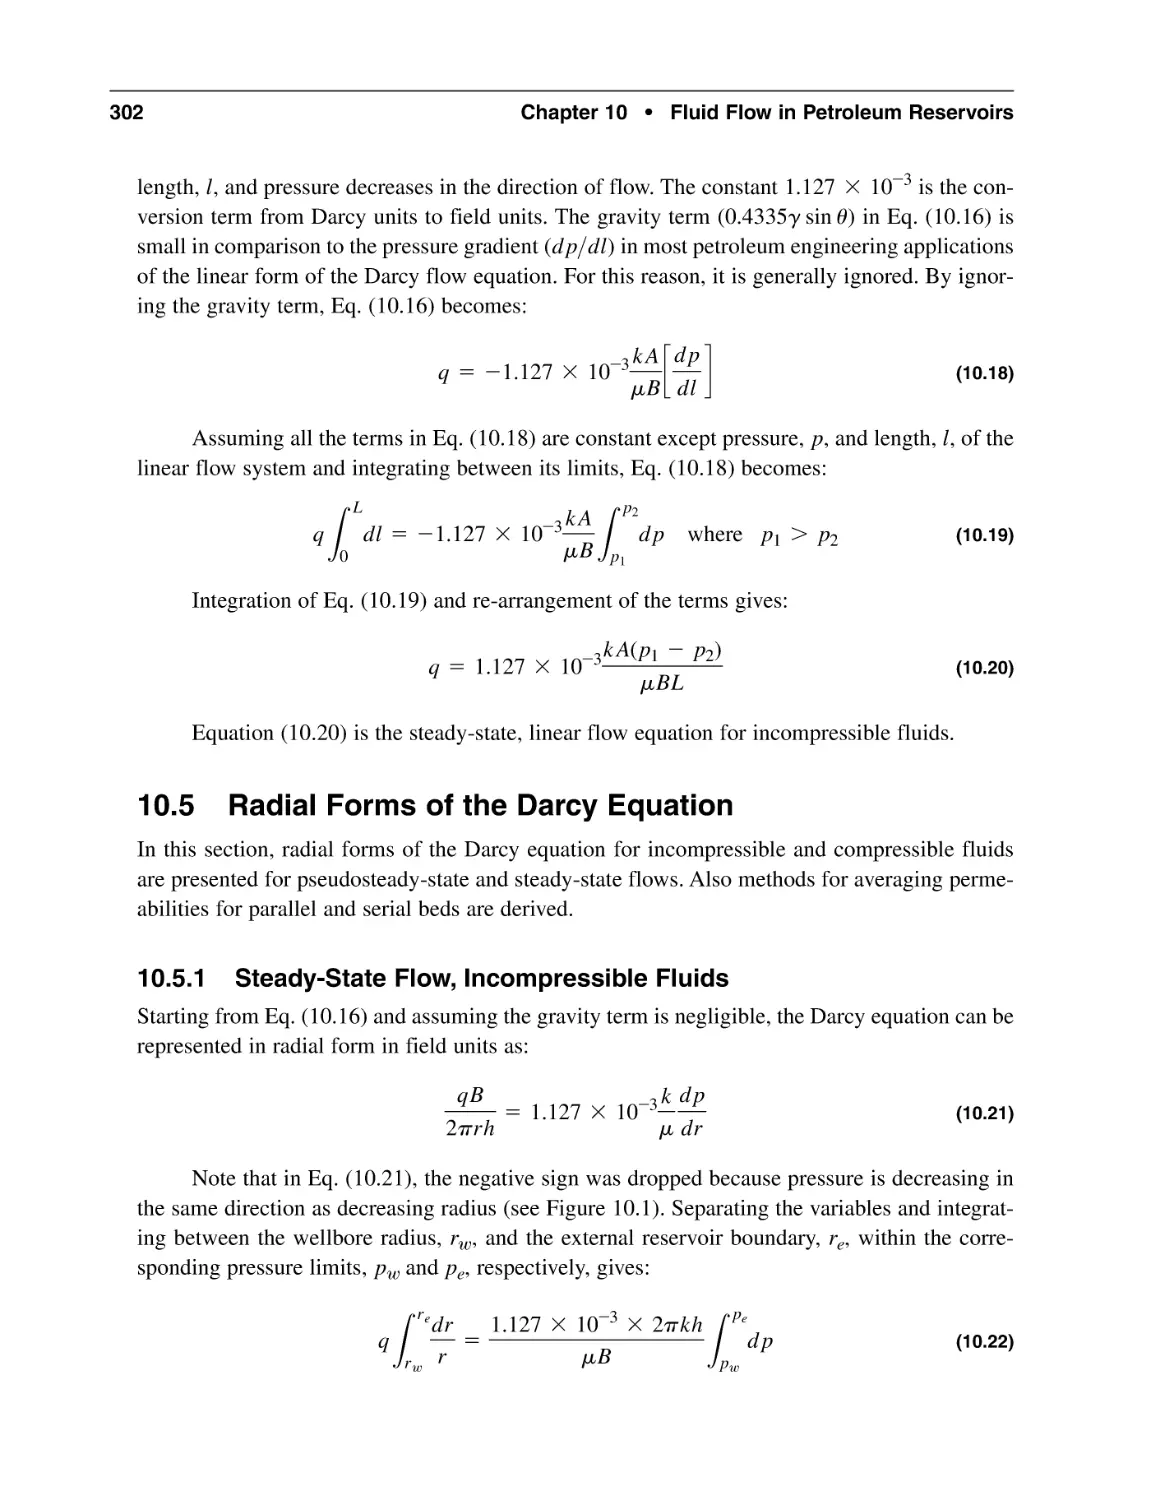 10.5 Radial Forms of the Darcy Equation
10.5.1 Steady-State Flow, Incompressible Fluids